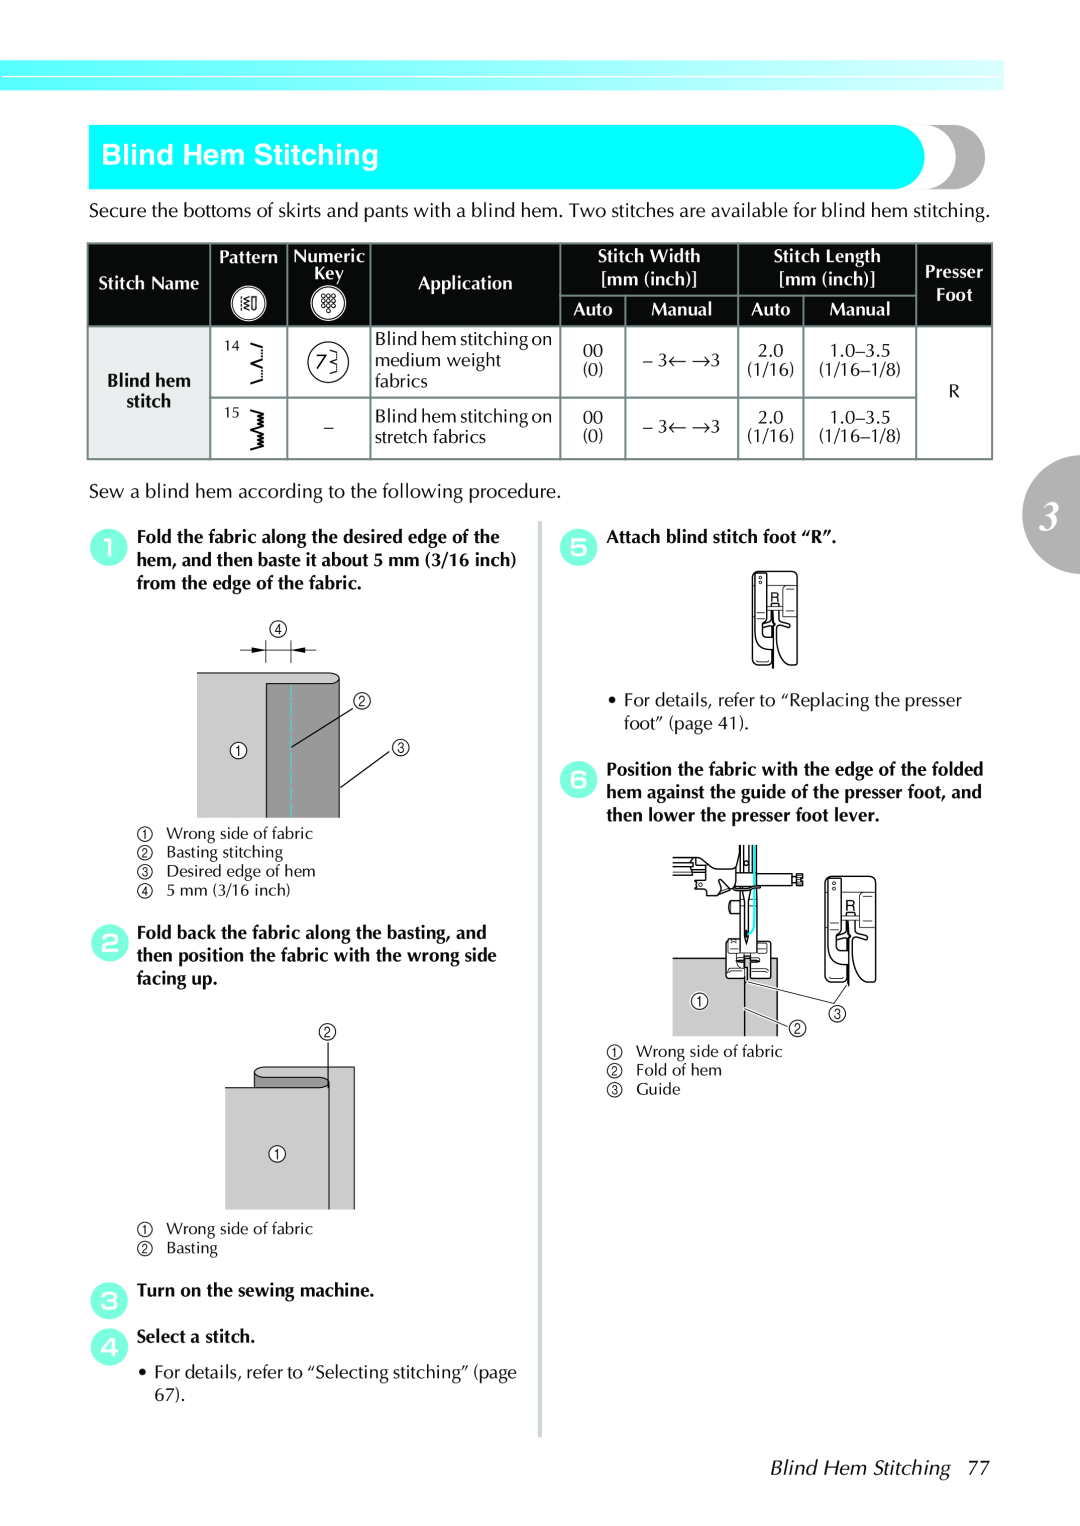 Brother Sewing Machines operation manual Blind Hem Stitching, Sew a blind hem according to the following procedure 